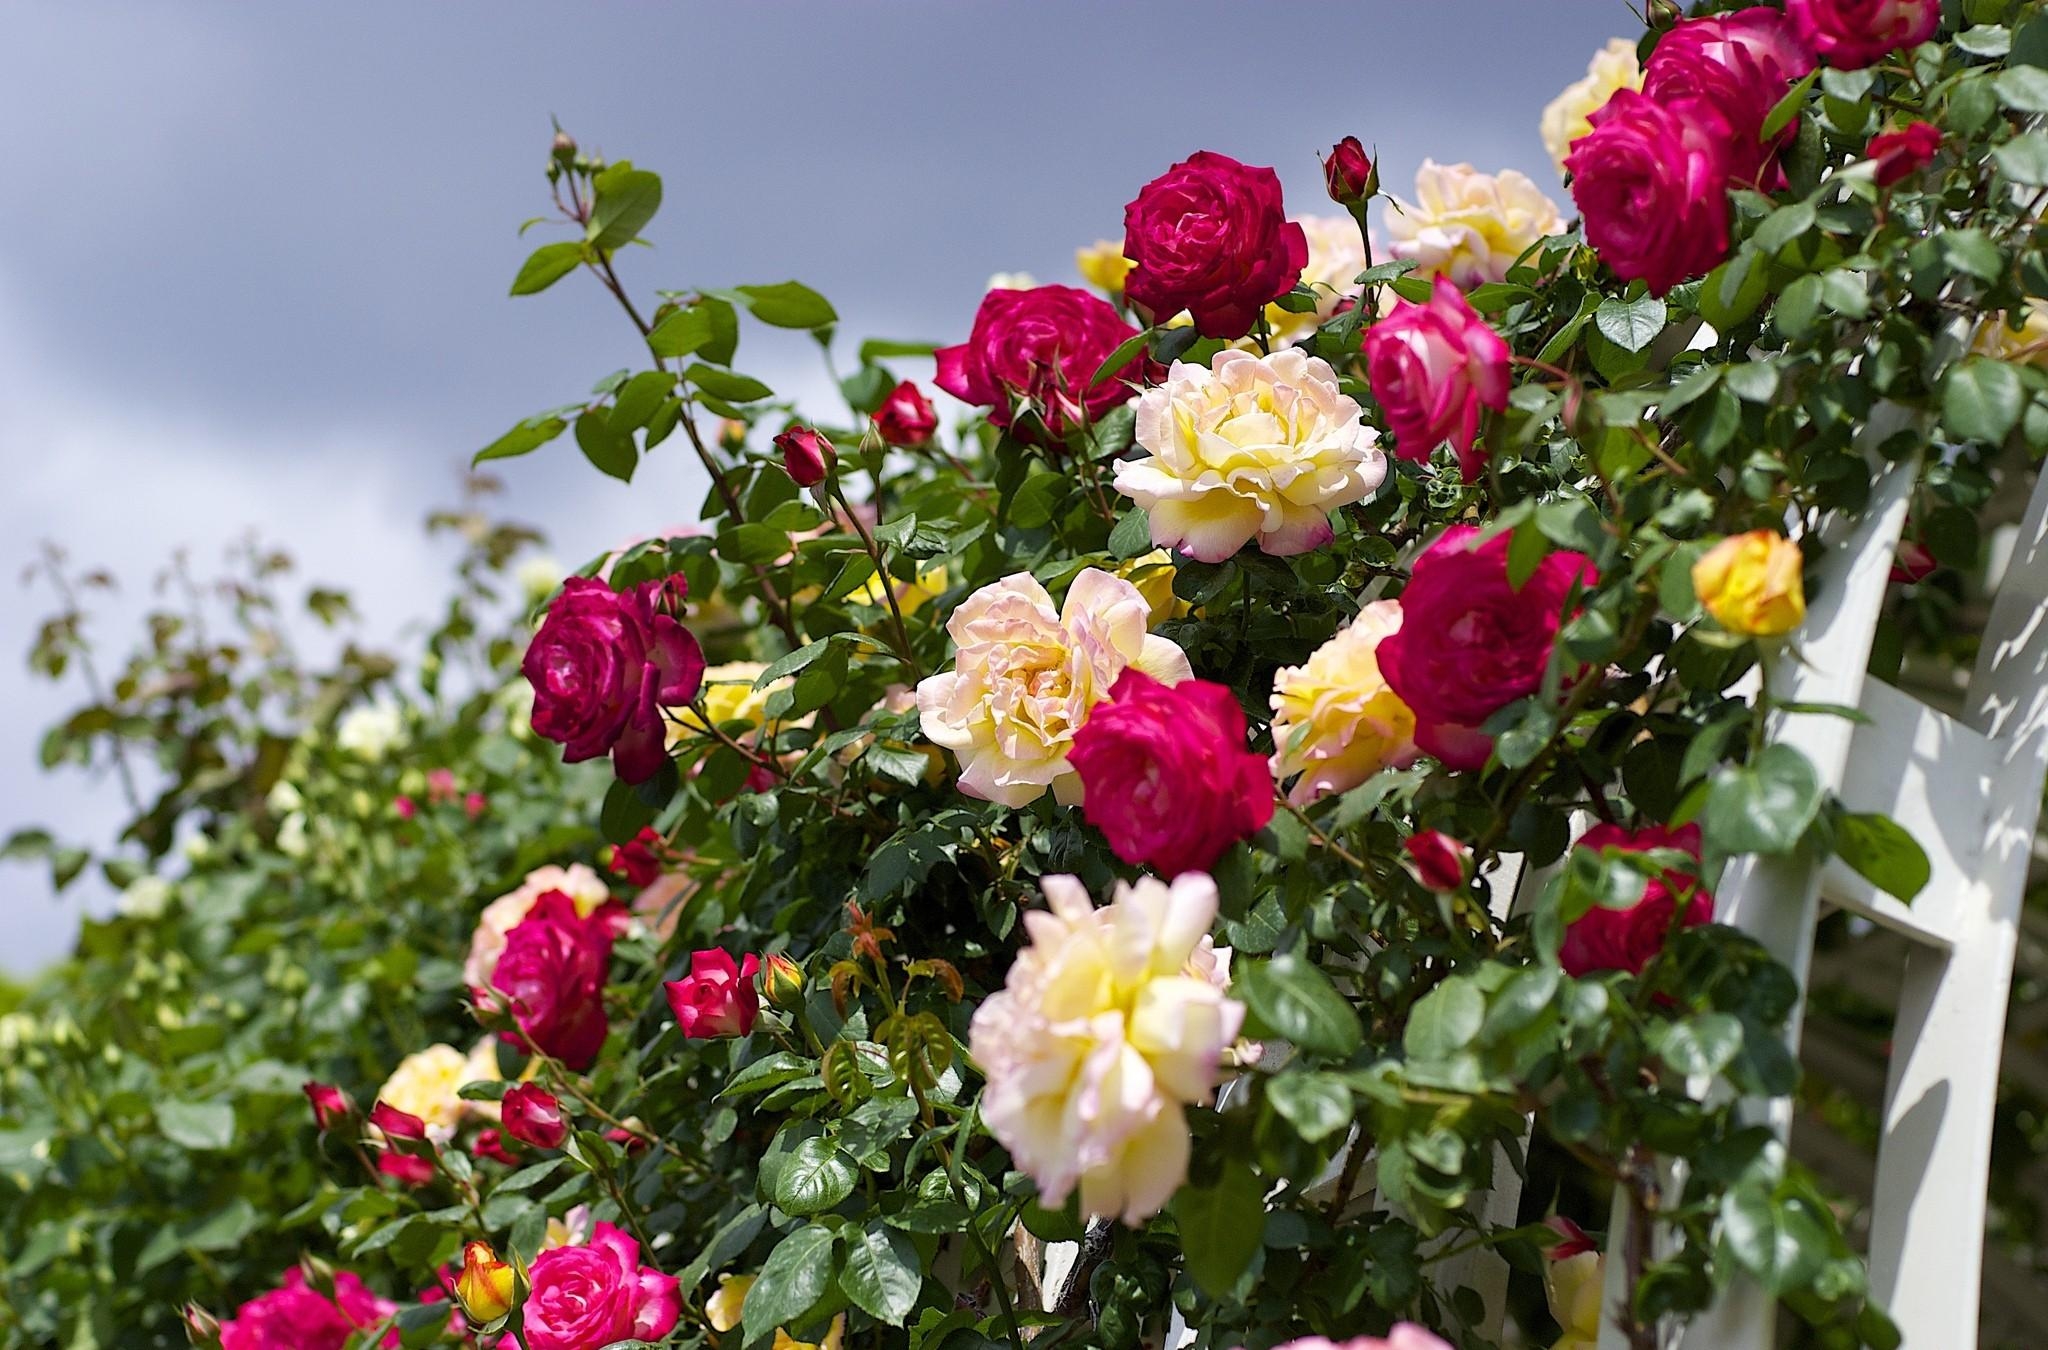 android roses, flowers, sky, bloom, flowering, garden, handsomely, it's beautiful